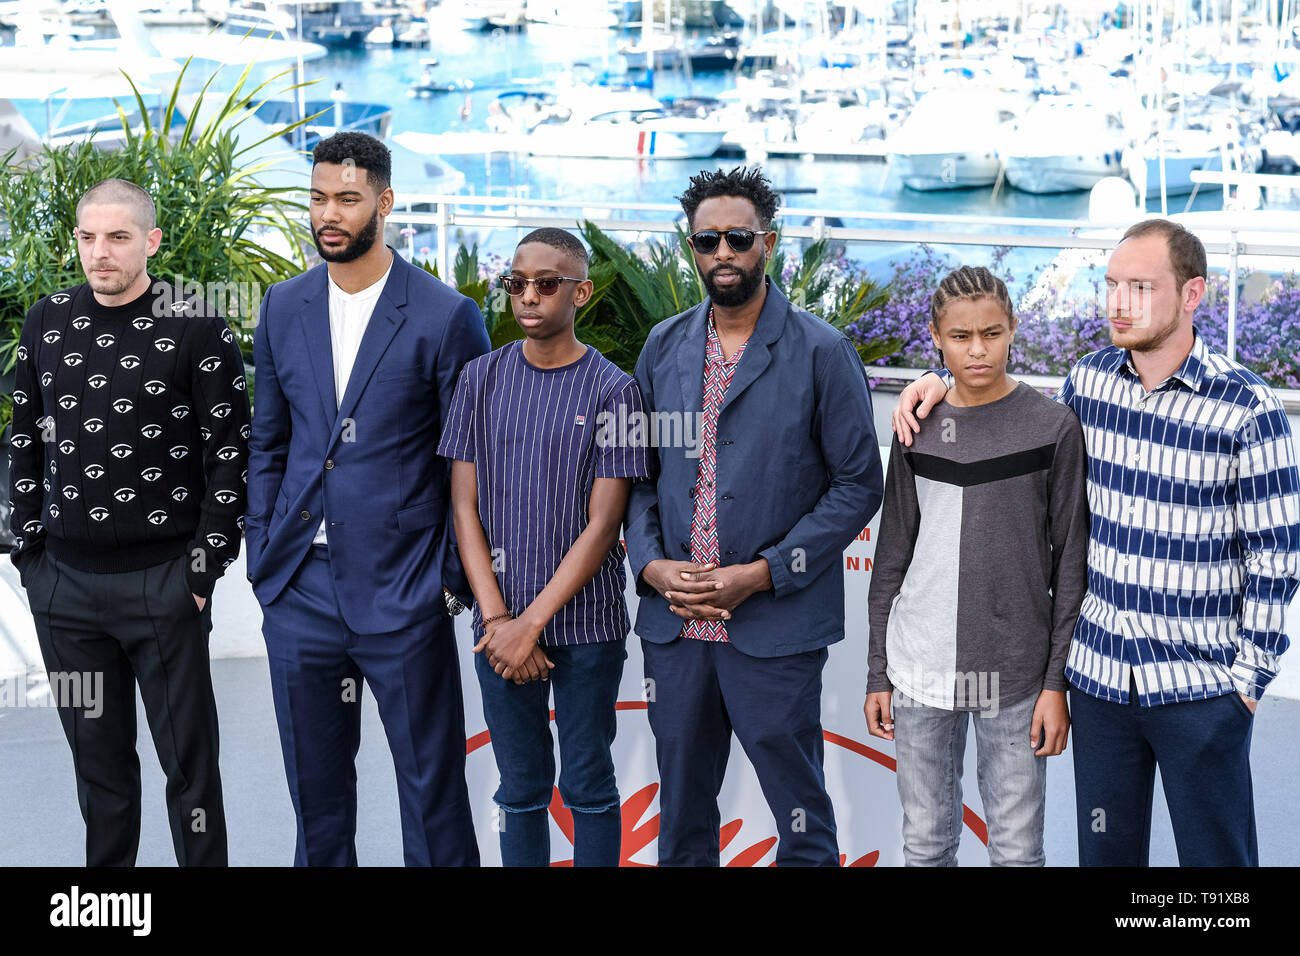 Cannes, France. 16th May 2019. Director Ladj LY and cast poses at a photocall for Les Miserables on Thursday 16 May 2019 at the 72nd Festival de Cannes, Palais des Festivals, Cannes. Pictured: Director Ladj LY, Damien Bonnard, Alexis Manenti, Djebril Zonga, Issa Perica, Al Hassan Ly, Almamy Kanoute, Steve Tientcheu, Nizar Ben Fatma, Lucas Omiri, Oumar Soumare, Magid, Nabil Akrouti, Bachir Ghouinem, Zorro Lopez, Diego Lopez, Rocco Lopez, Jaihson Lopez, Et Luciano Lopez, Giordano Gederlini, Toufik Ayadi, Christophe Barral . Picture by Credit: Julie Edwards/Alamy Live News Stock Photo